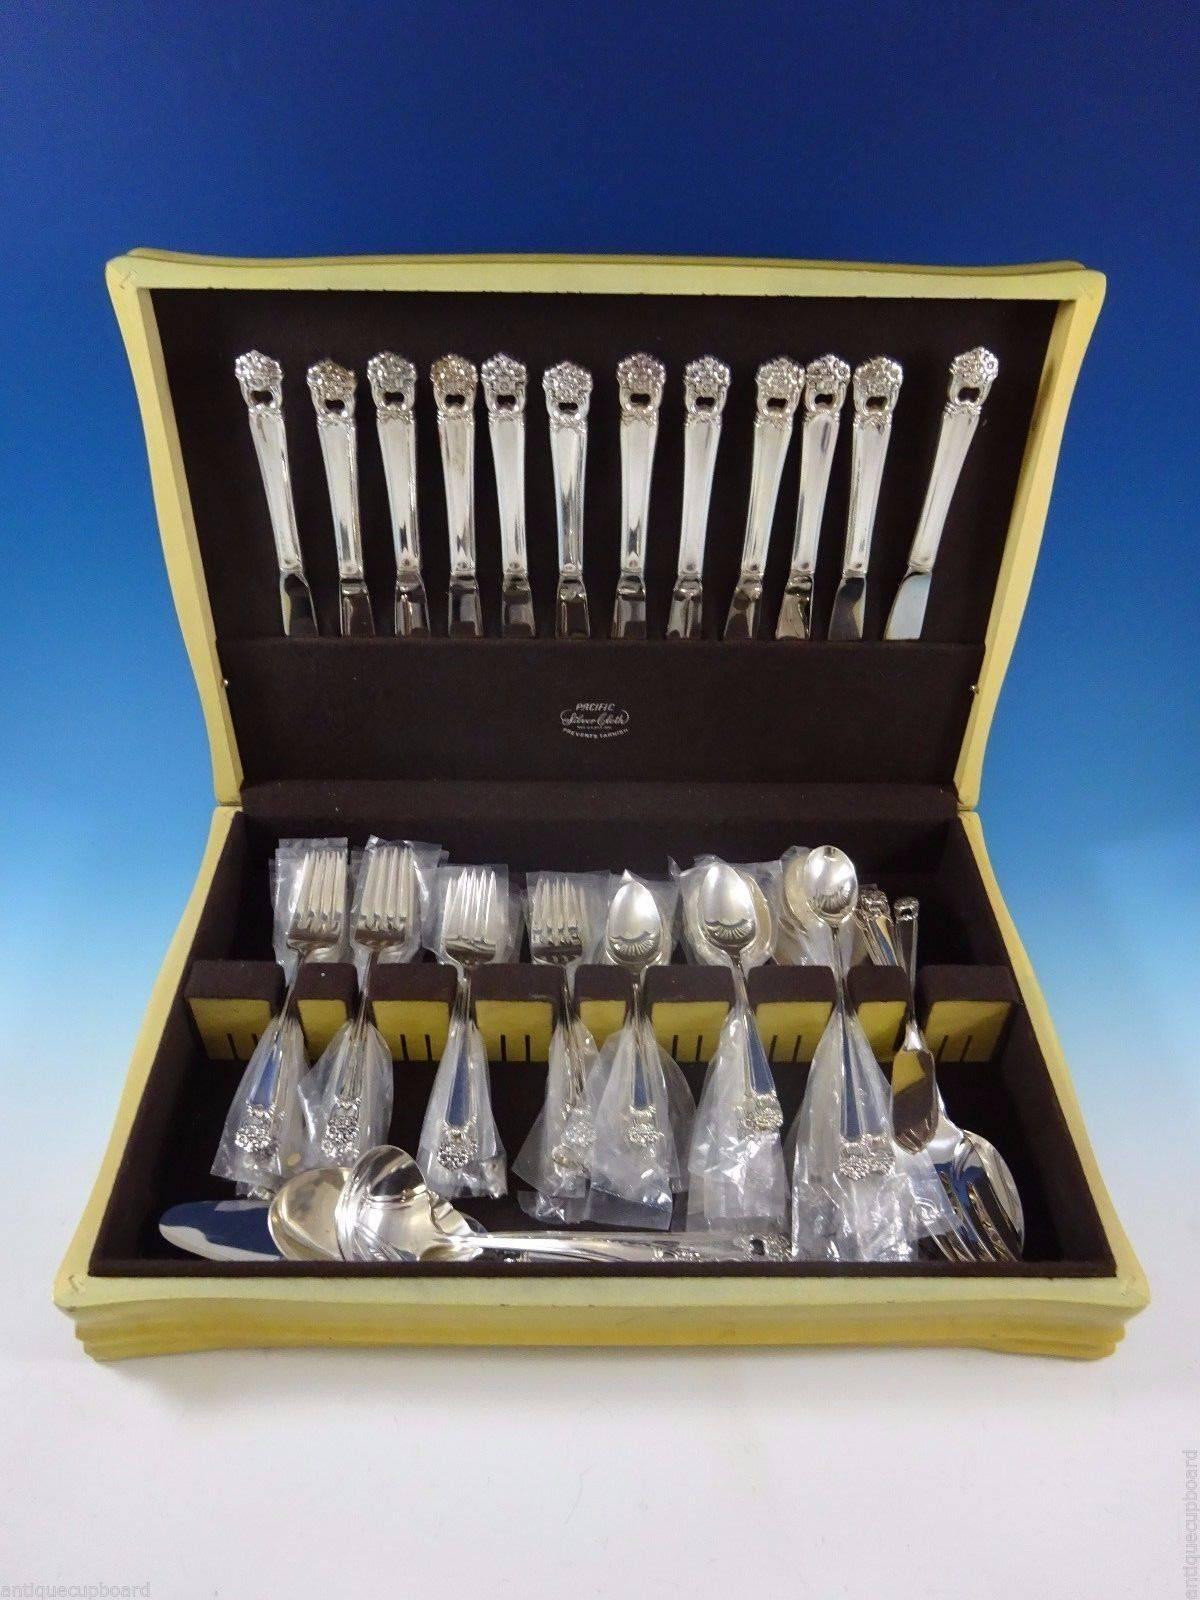 Eternally yours by 1847 Rogers silver-plate flatware set, 67 pieces. This set includes: 

12 dinner knives, 9 1/4